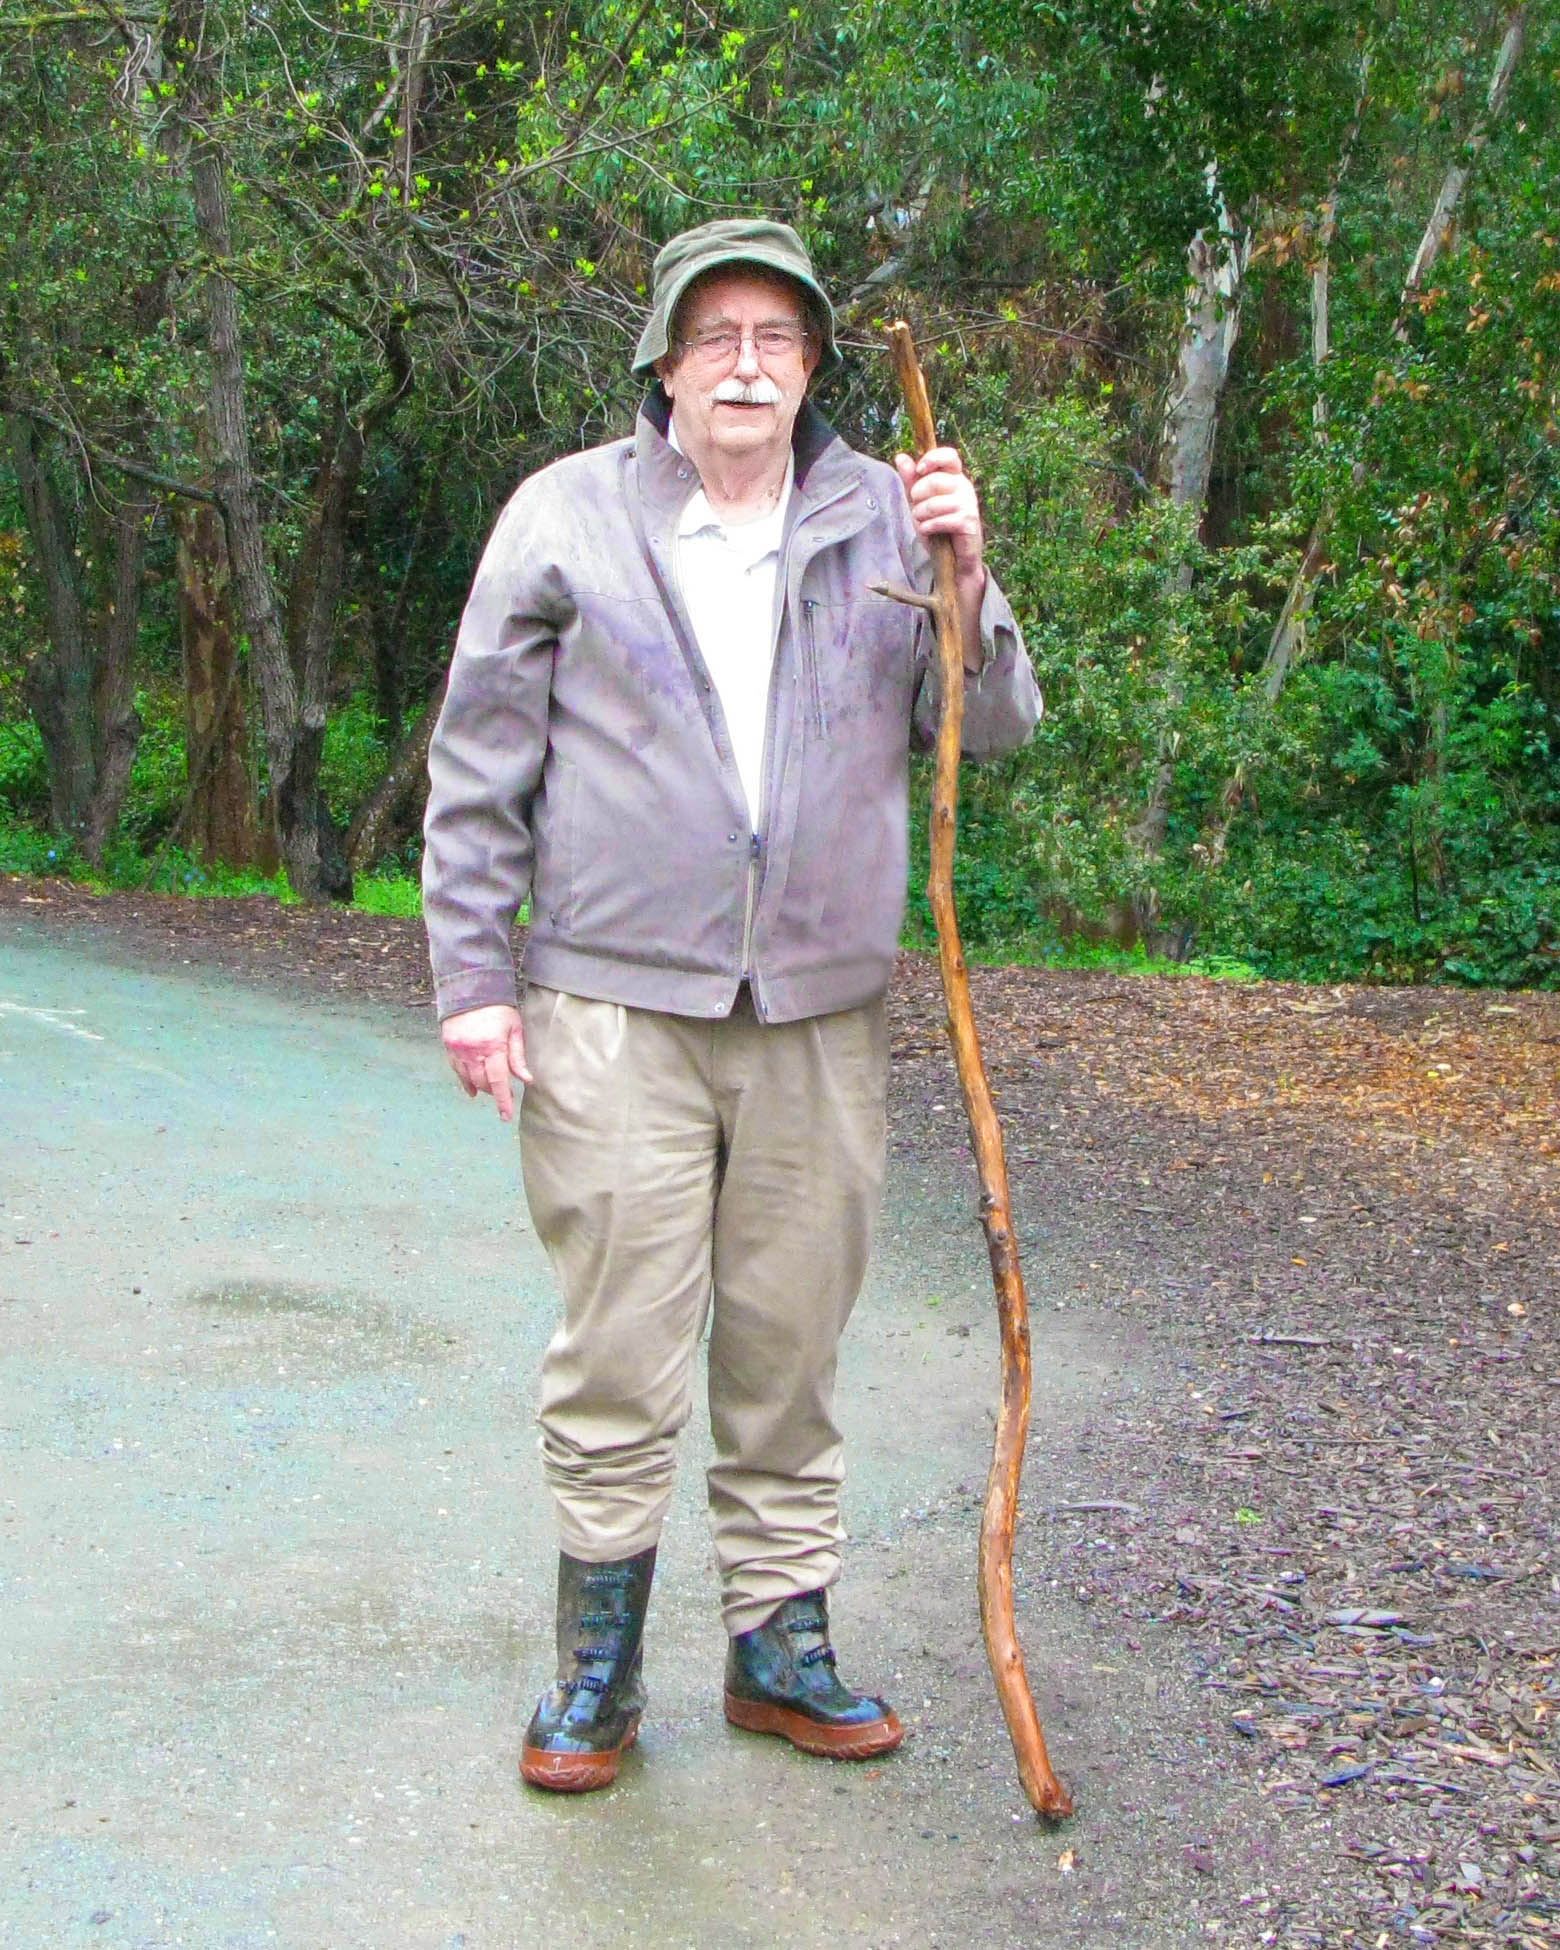 the old man is posing with a long stick